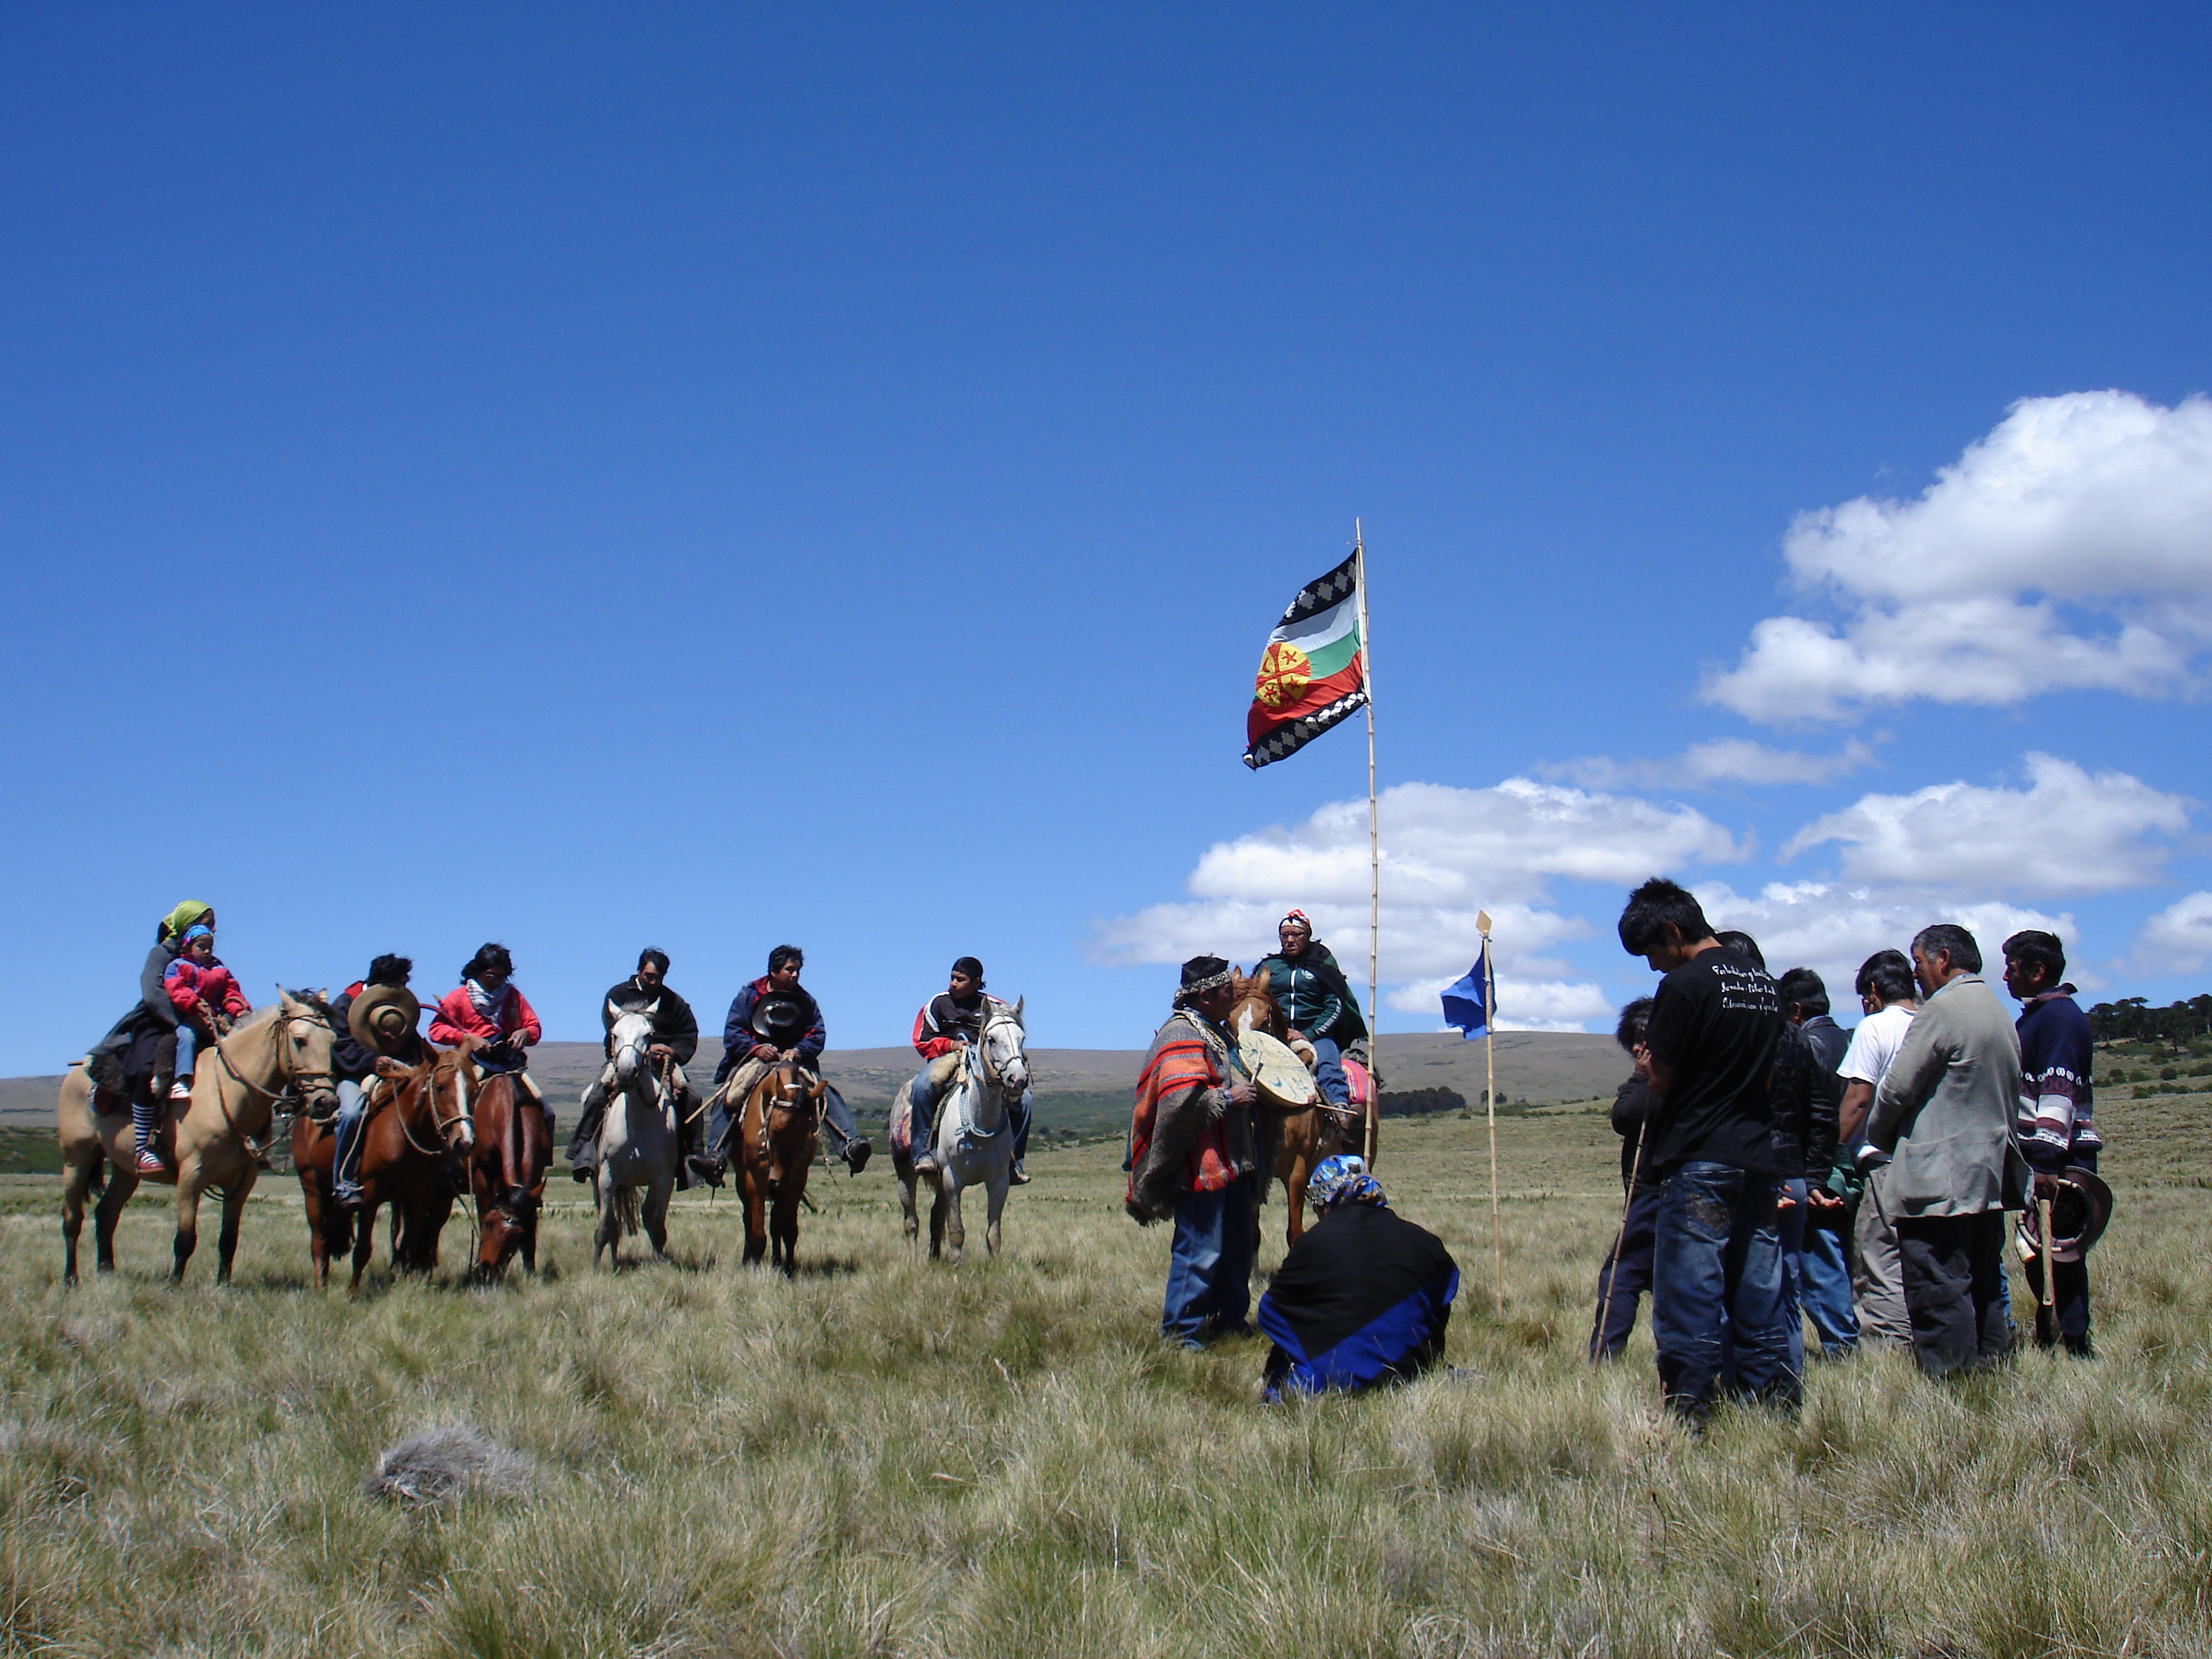 The Mapuche flag flies over a group of people, some on horseback and others standing or sitting in a circle, during a religious ceremony held in a grassy area under a blue sky